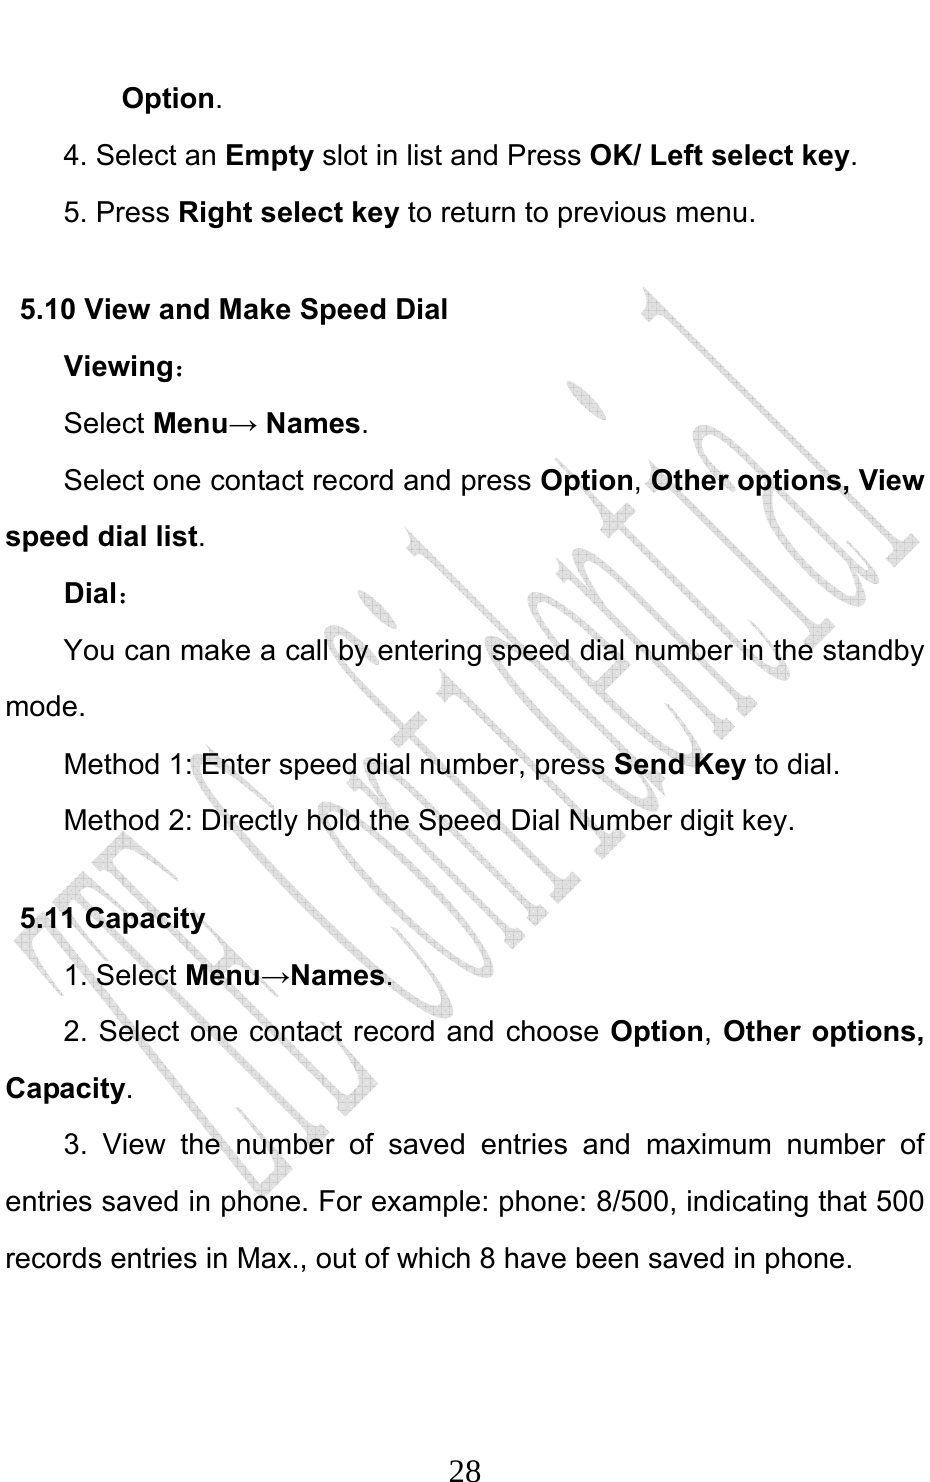                              28Option.  4. Select an Empty slot in list and Press OK/ Left select key. 5. Press Right select key to return to previous menu. 5.10 View and Make Speed Dial Viewing： Select Menu→ Names. Select one contact record and press Option, Other options, View speed dial list.  Dial： You can make a call by entering speed dial number in the standby mode.  Method 1: Enter speed dial number, press Send Key to dial.  Method 2: Directly hold the Speed Dial Number digit key.   5.11 Capacity   1. Select Menu→Names. 2. Select one contact record and choose Option, Other options, Capacity. 3. View the number of saved entries and maximum number of entries saved in phone. For example: phone: 8/500, indicating that 500 records entries in Max., out of which 8 have been saved in phone.   